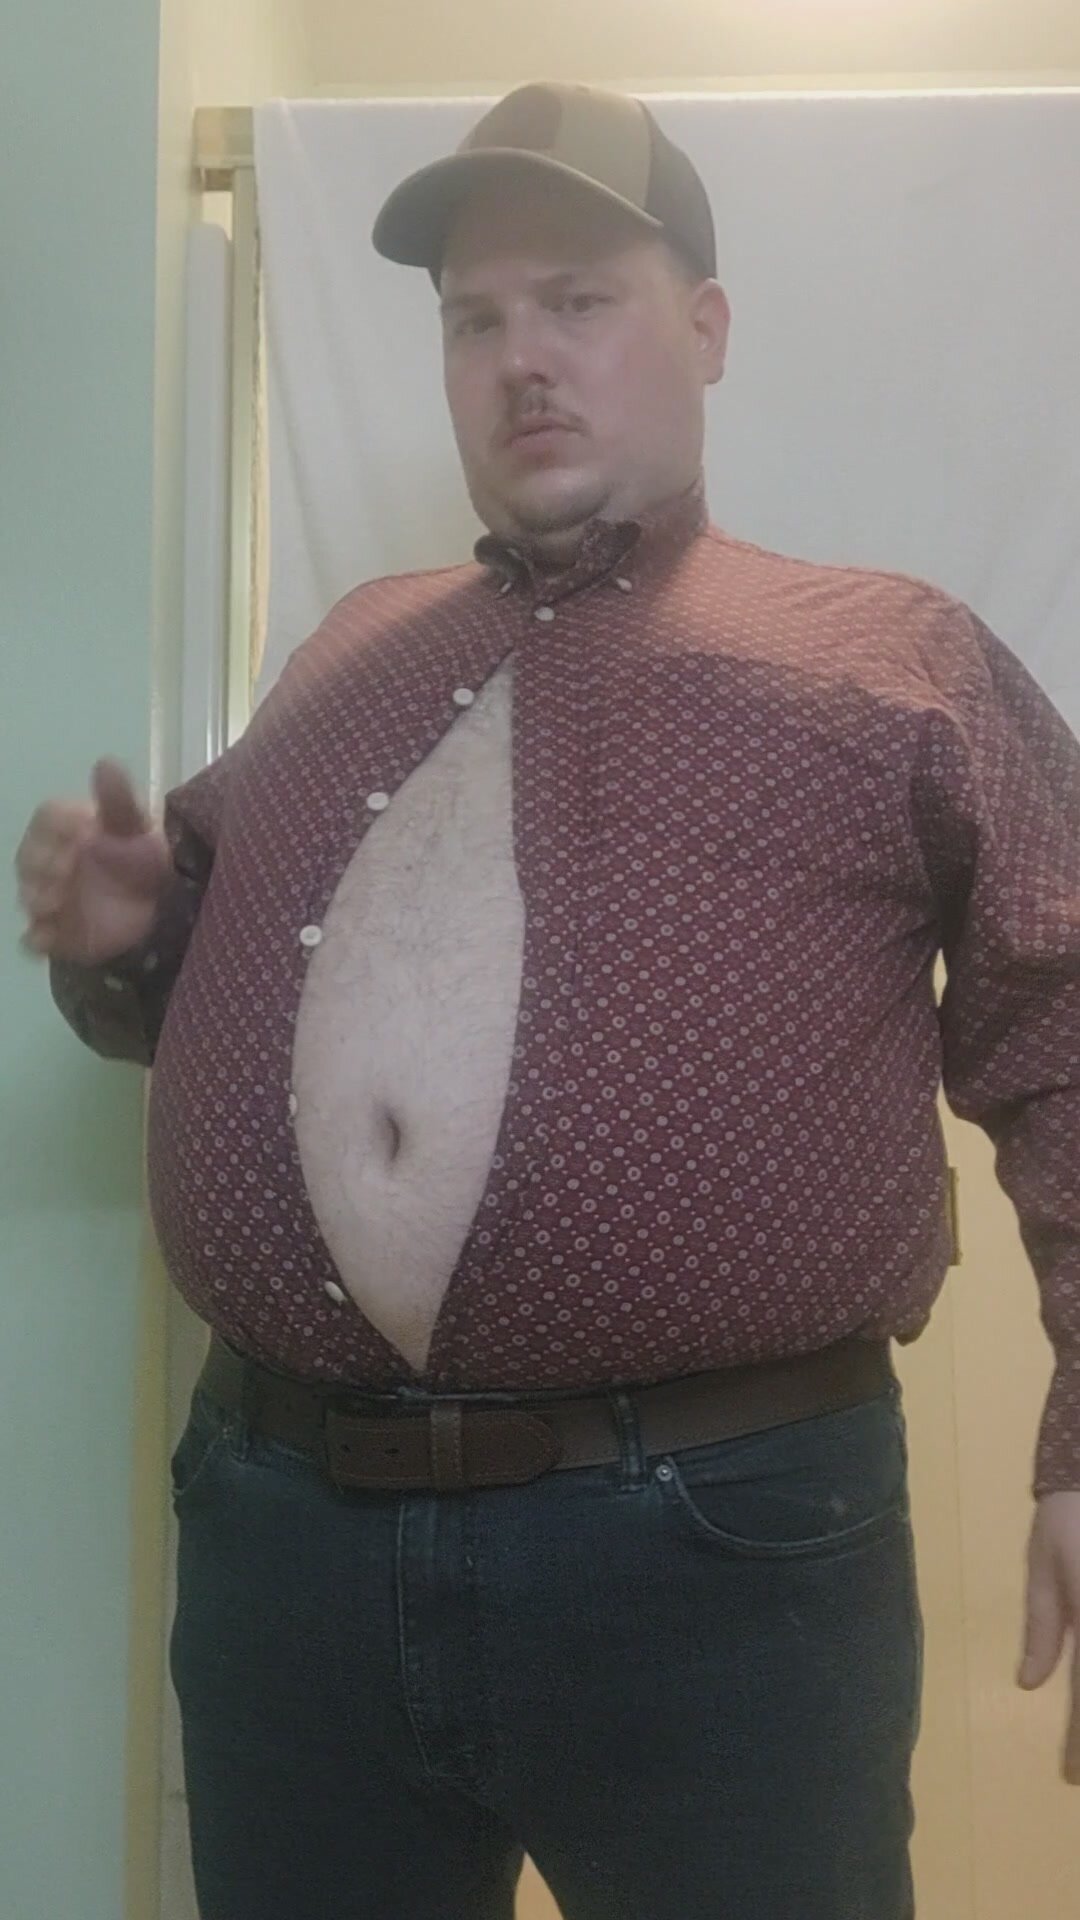 Full belly trying on tight clothes